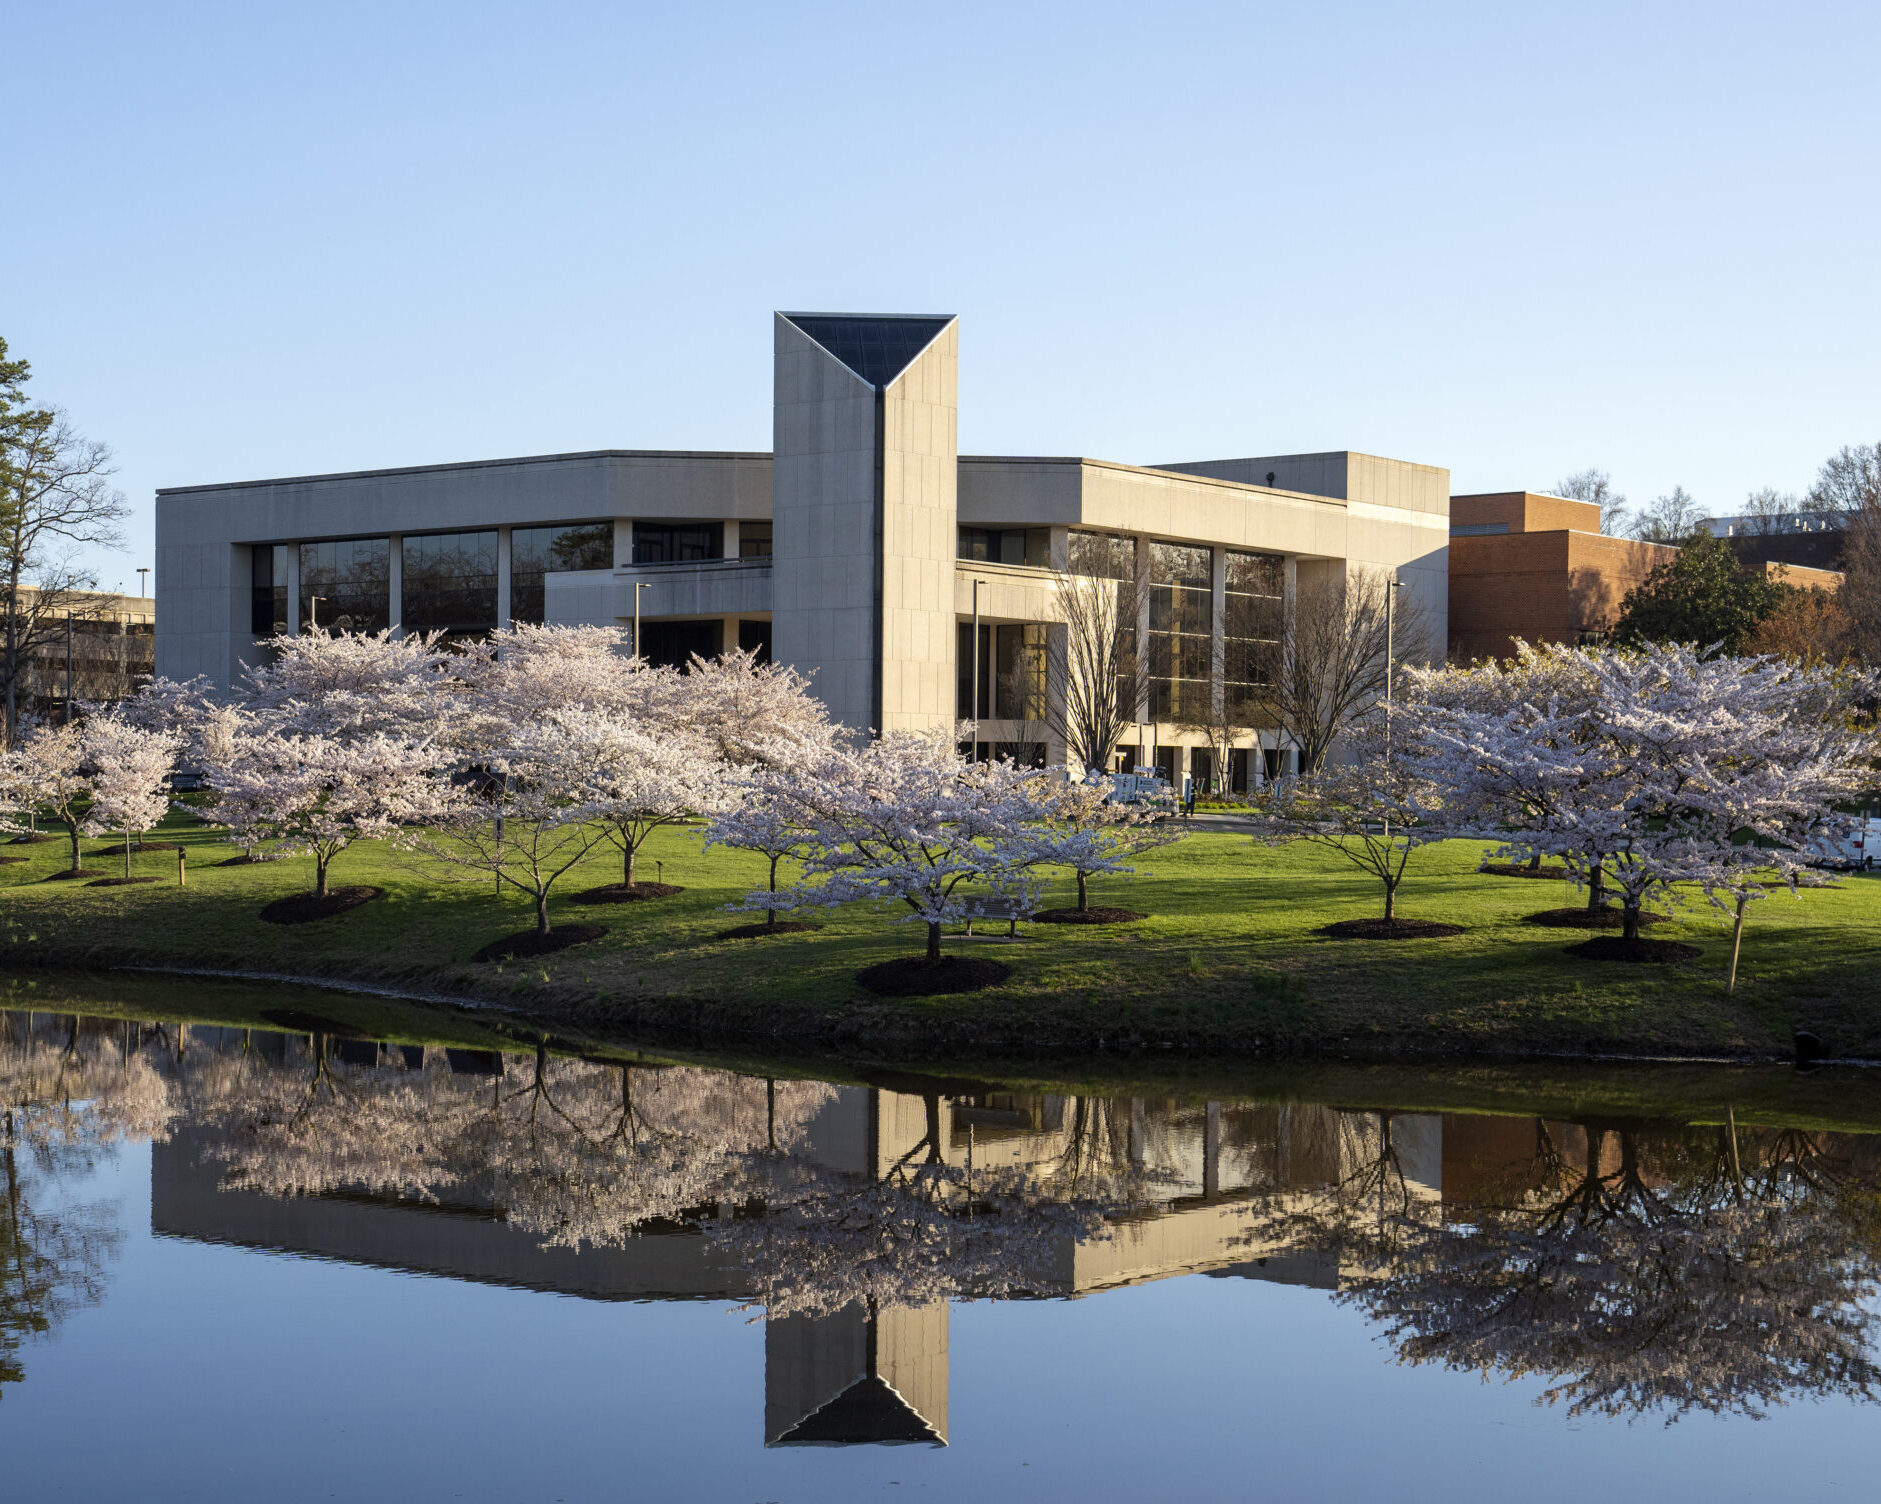 Center for the Arts and cherry blossom trees reflect in the Mason pond on the Fairfax Campus.